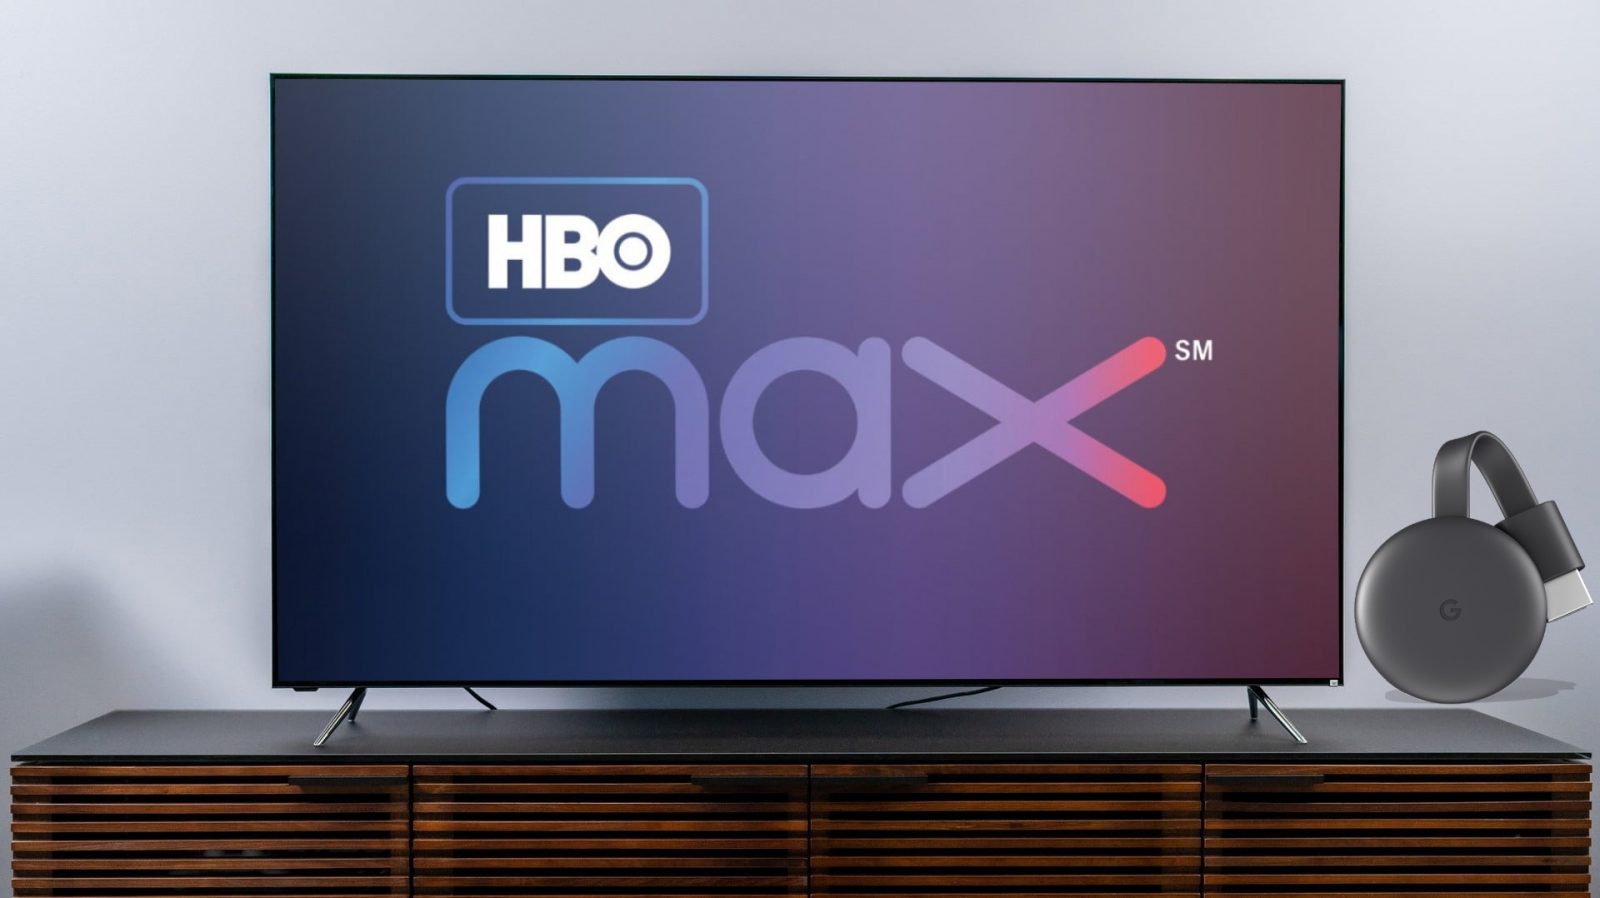 How to Watch HBO Max on Chromecast [2020]